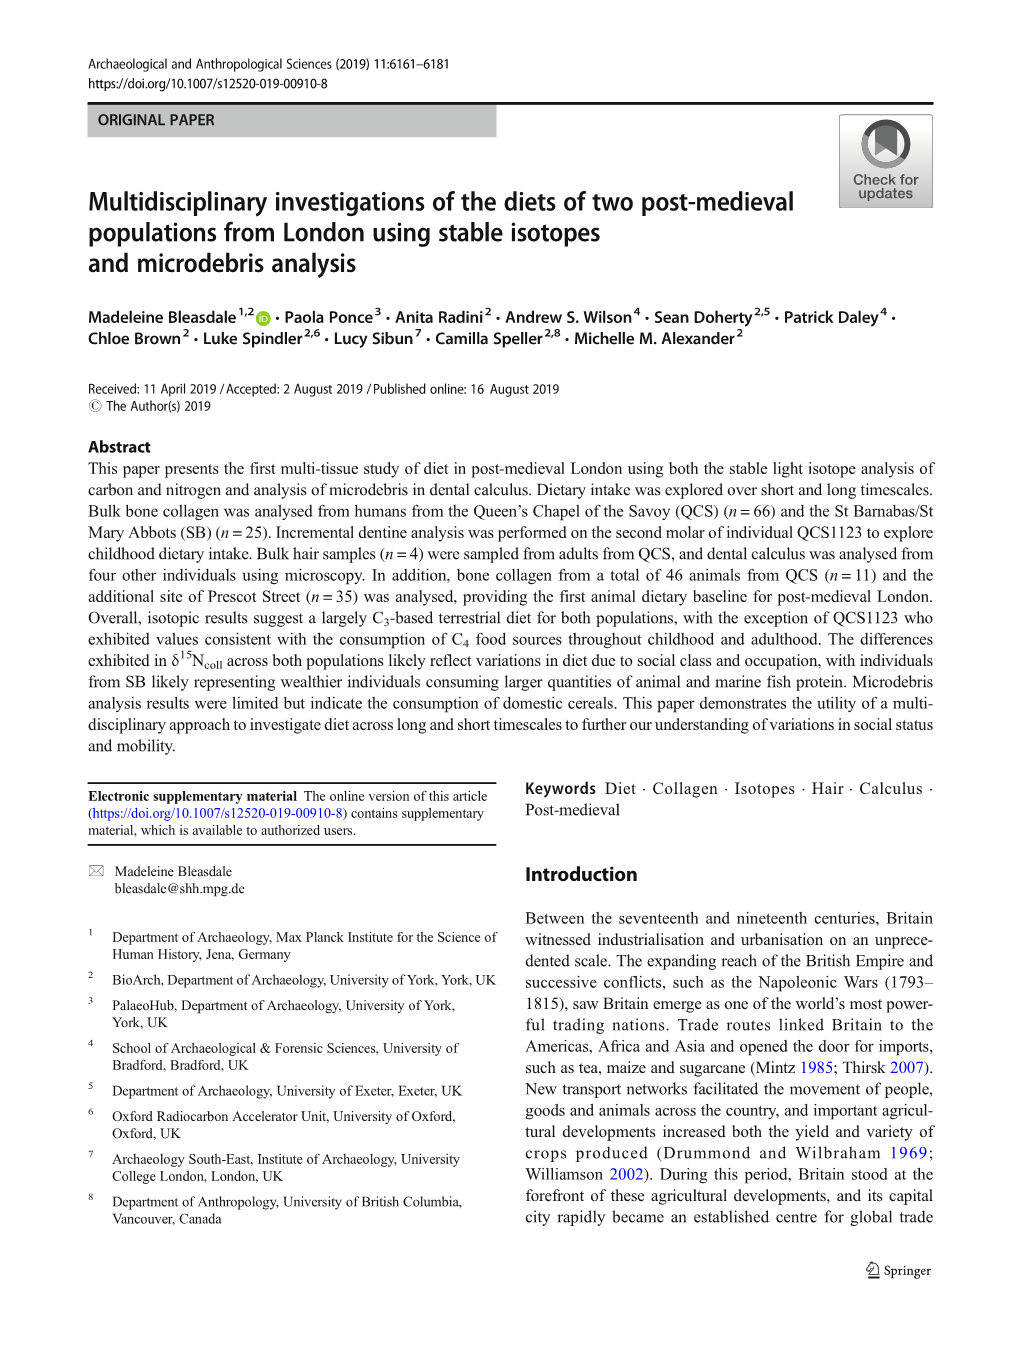 Multidisciplinary Investigations of the Diets of Two Post-Medieval Populations from London Using Stable Isotopes and Microdebris Analysis